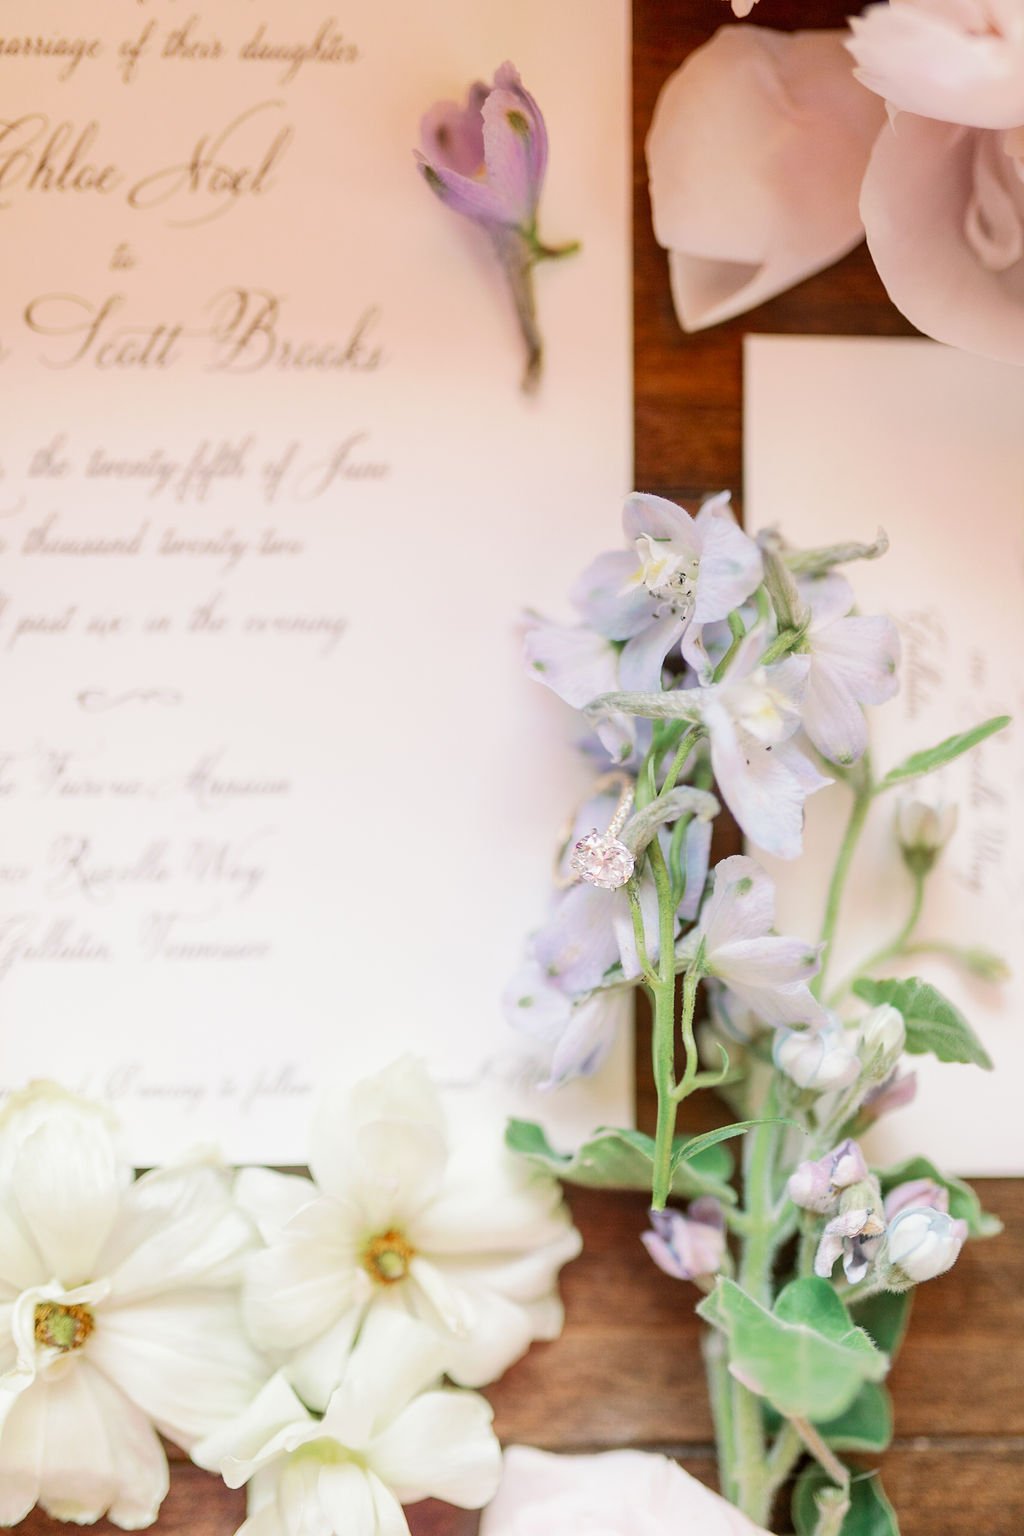 This private estate wedding creates a garden-inspired setting in hues of ivory, pink, blush, and French blue composed of petal heavy roses, peonies, hydrangeas, ranunculus, delphinium, spray roses, and natural greenery. Designed by Rosemary & Finch i